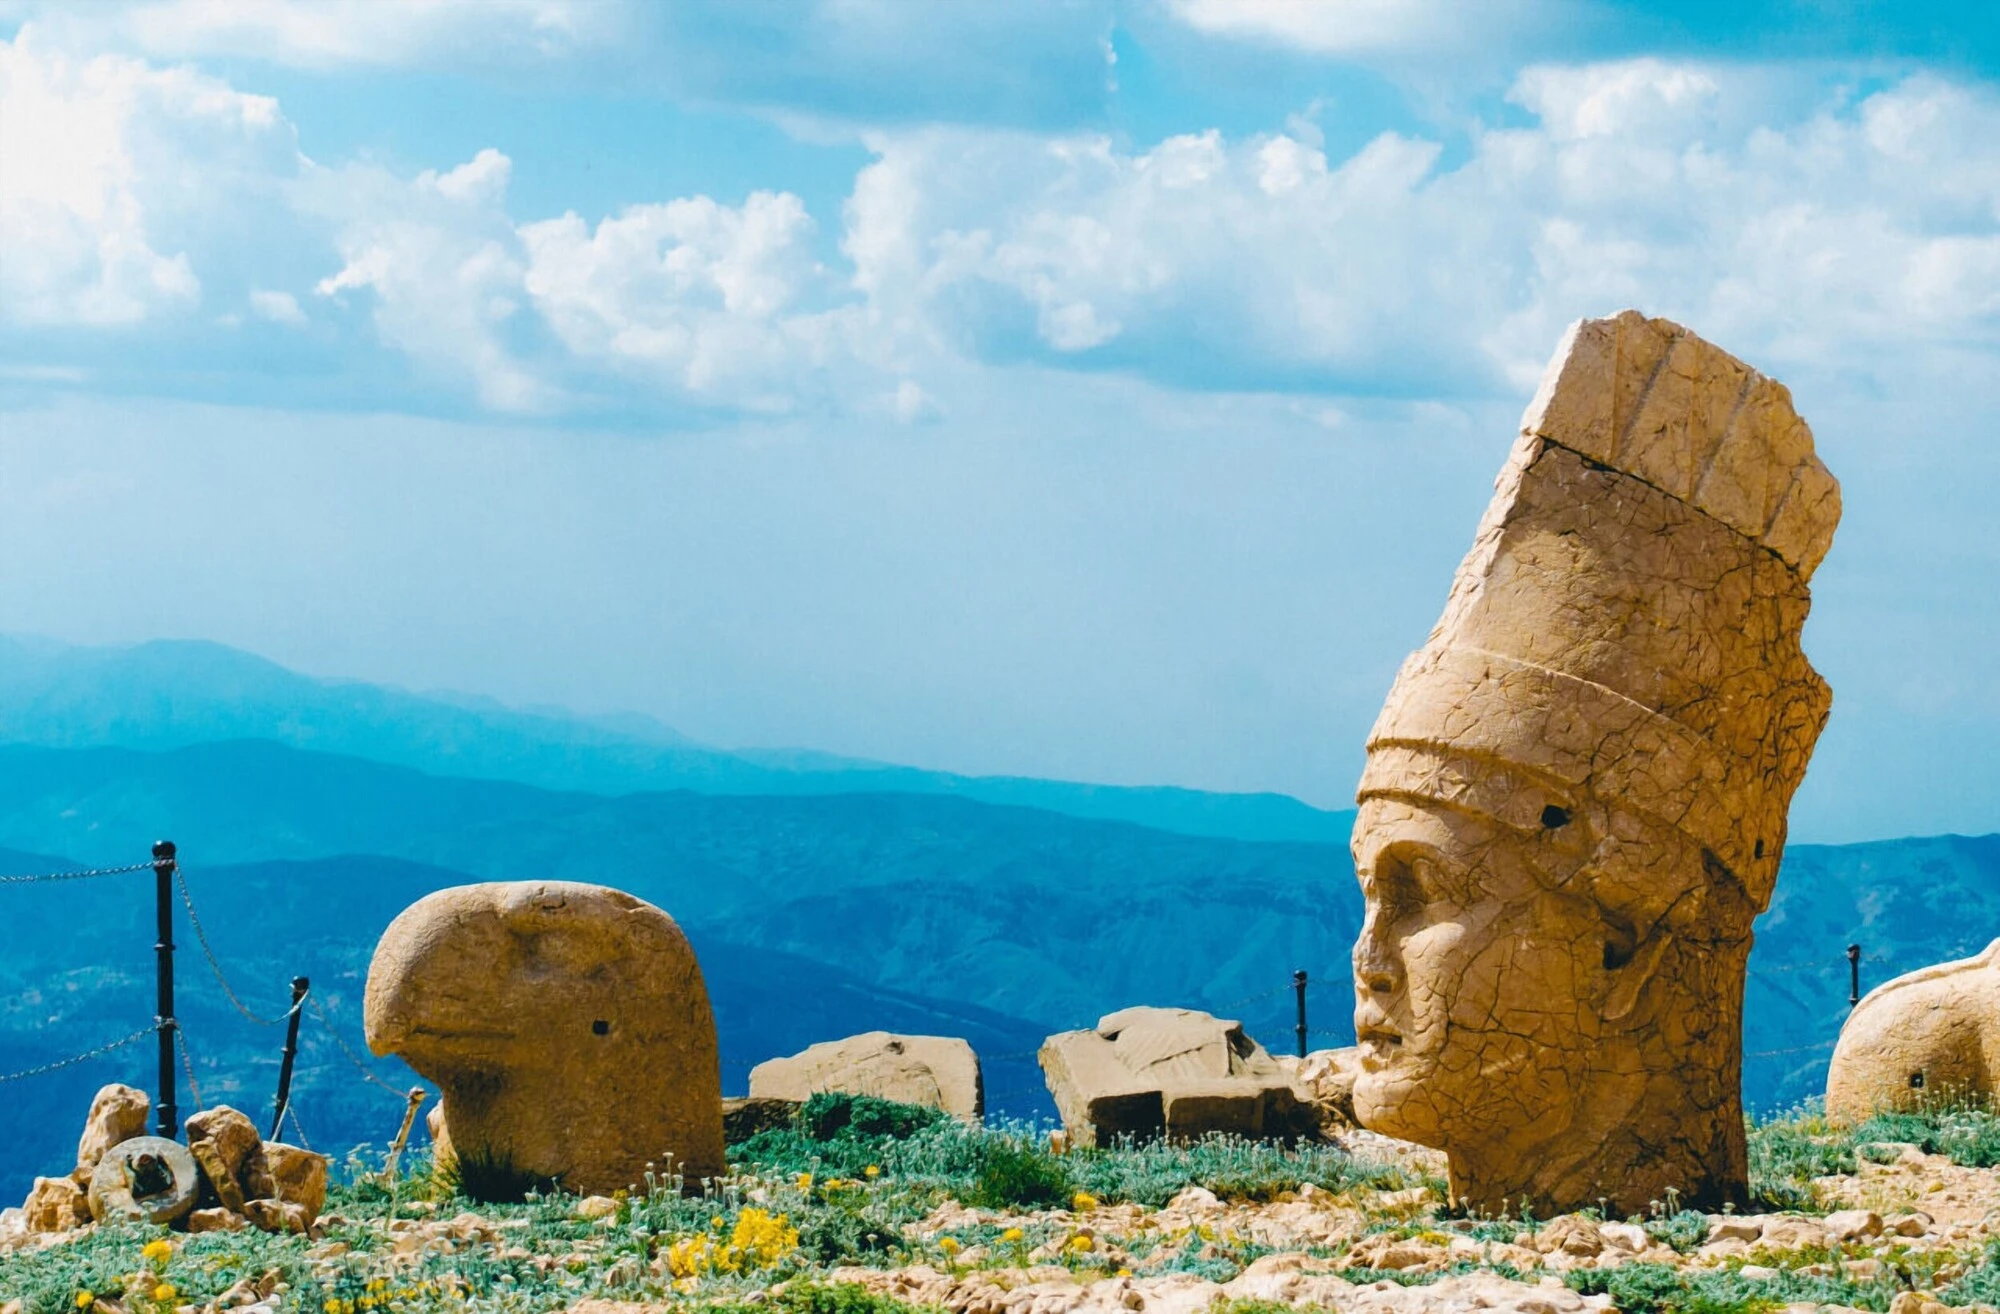 A Complete Guide to Backpacking Mt. Nemrut, Turkey